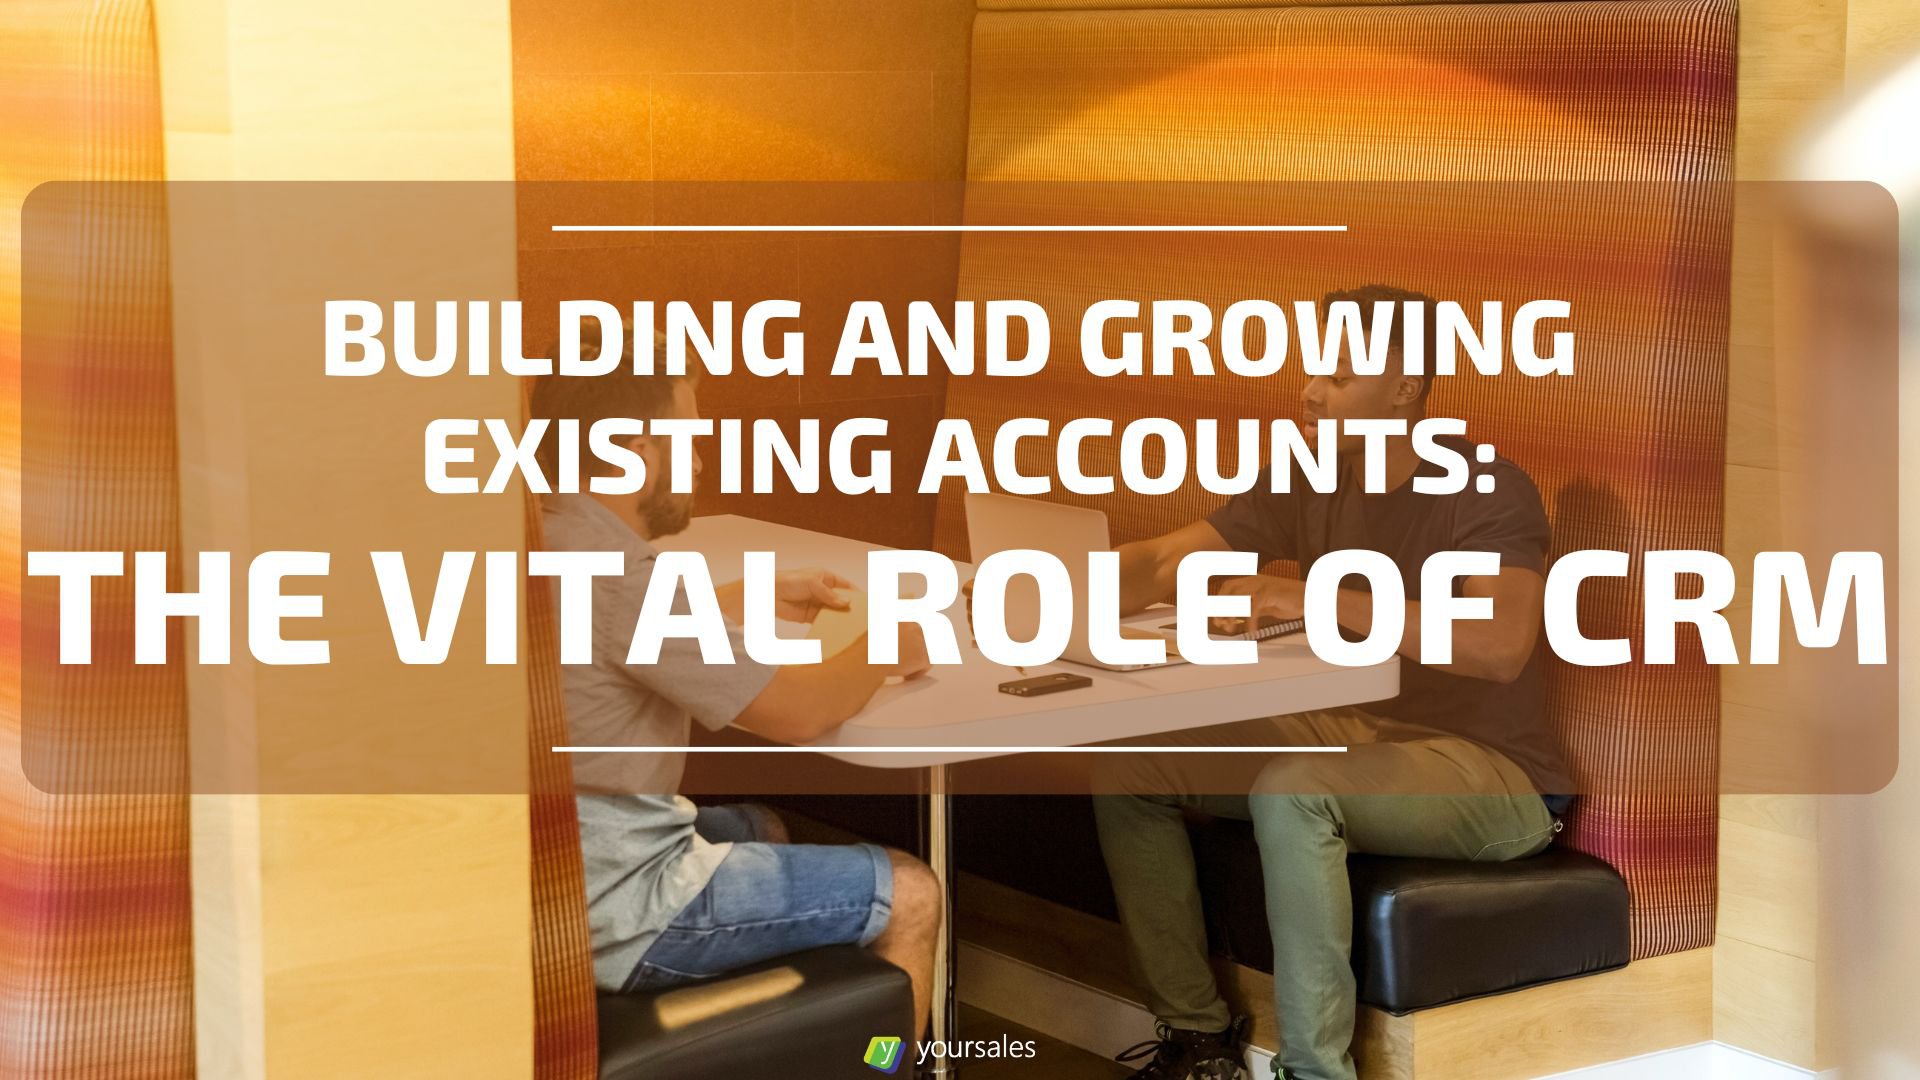 Featured image for “Building and Growing Existing Accounts: The Vital Role of CRM”